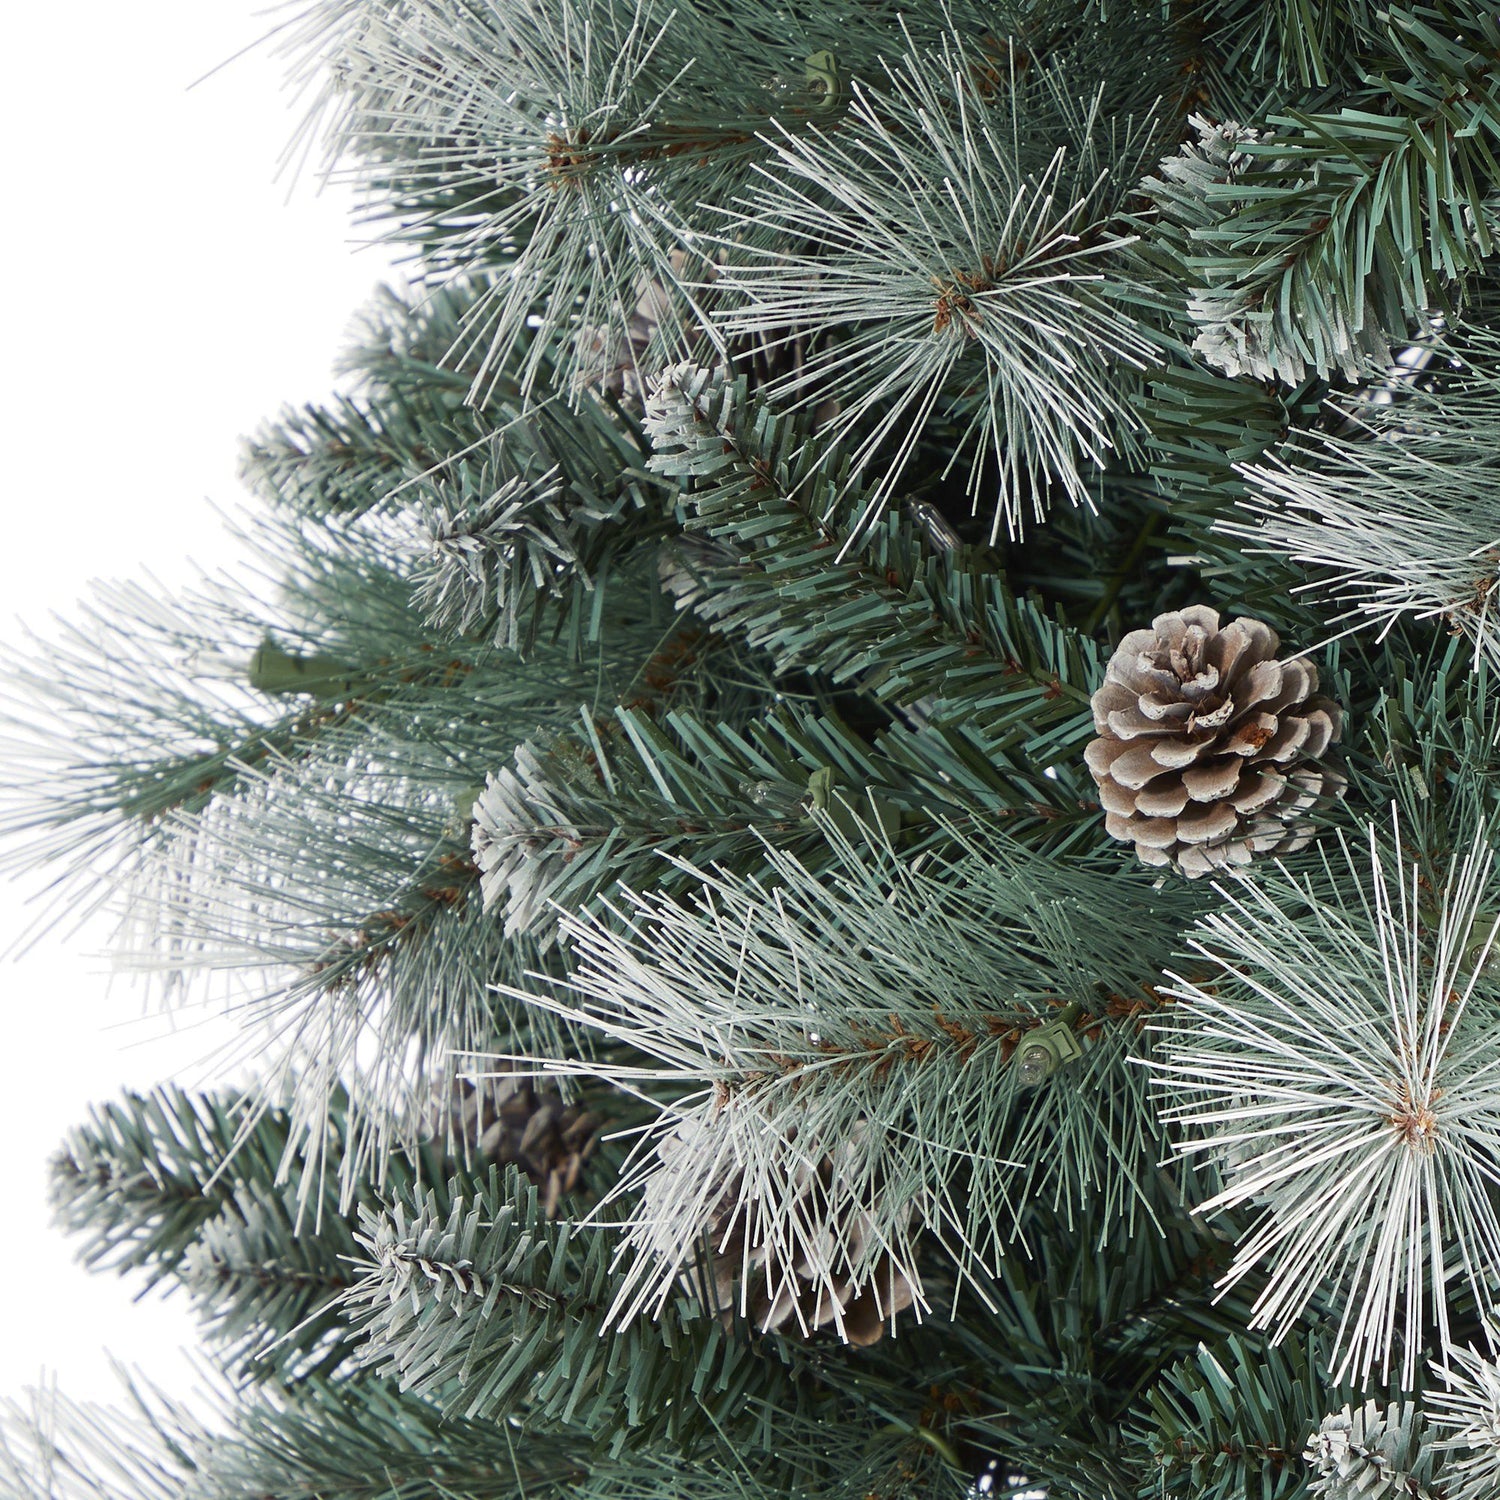 Frosted Tip British Columbia Mountain Pine Artificial Christmas Tree with 400 Clear Lights, Pine Cones and 882 Bendable Branches